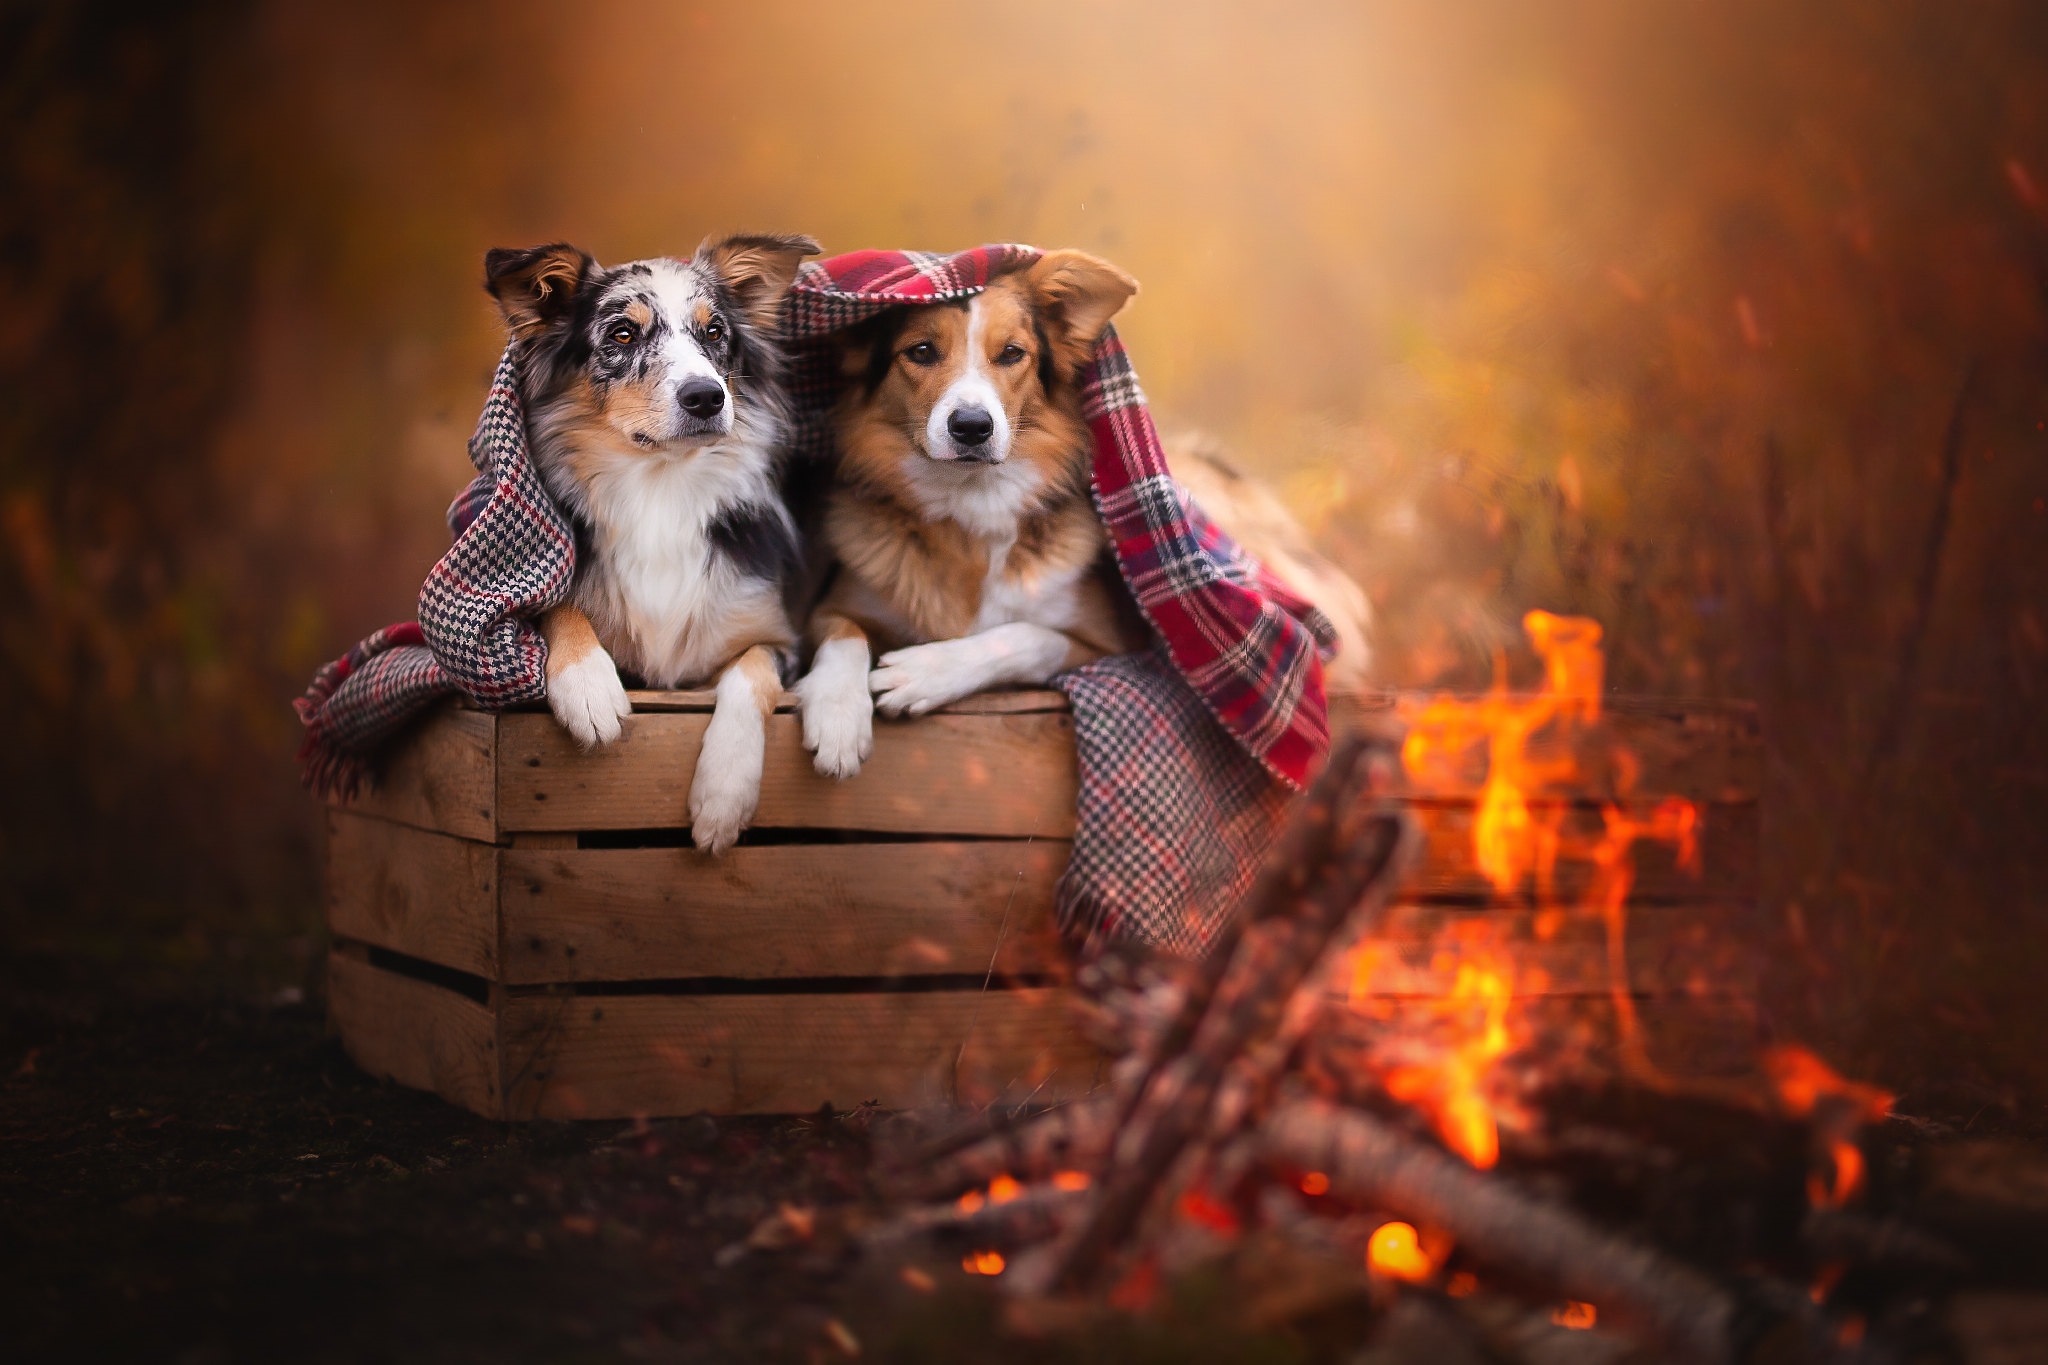 Dogs bask near the fire